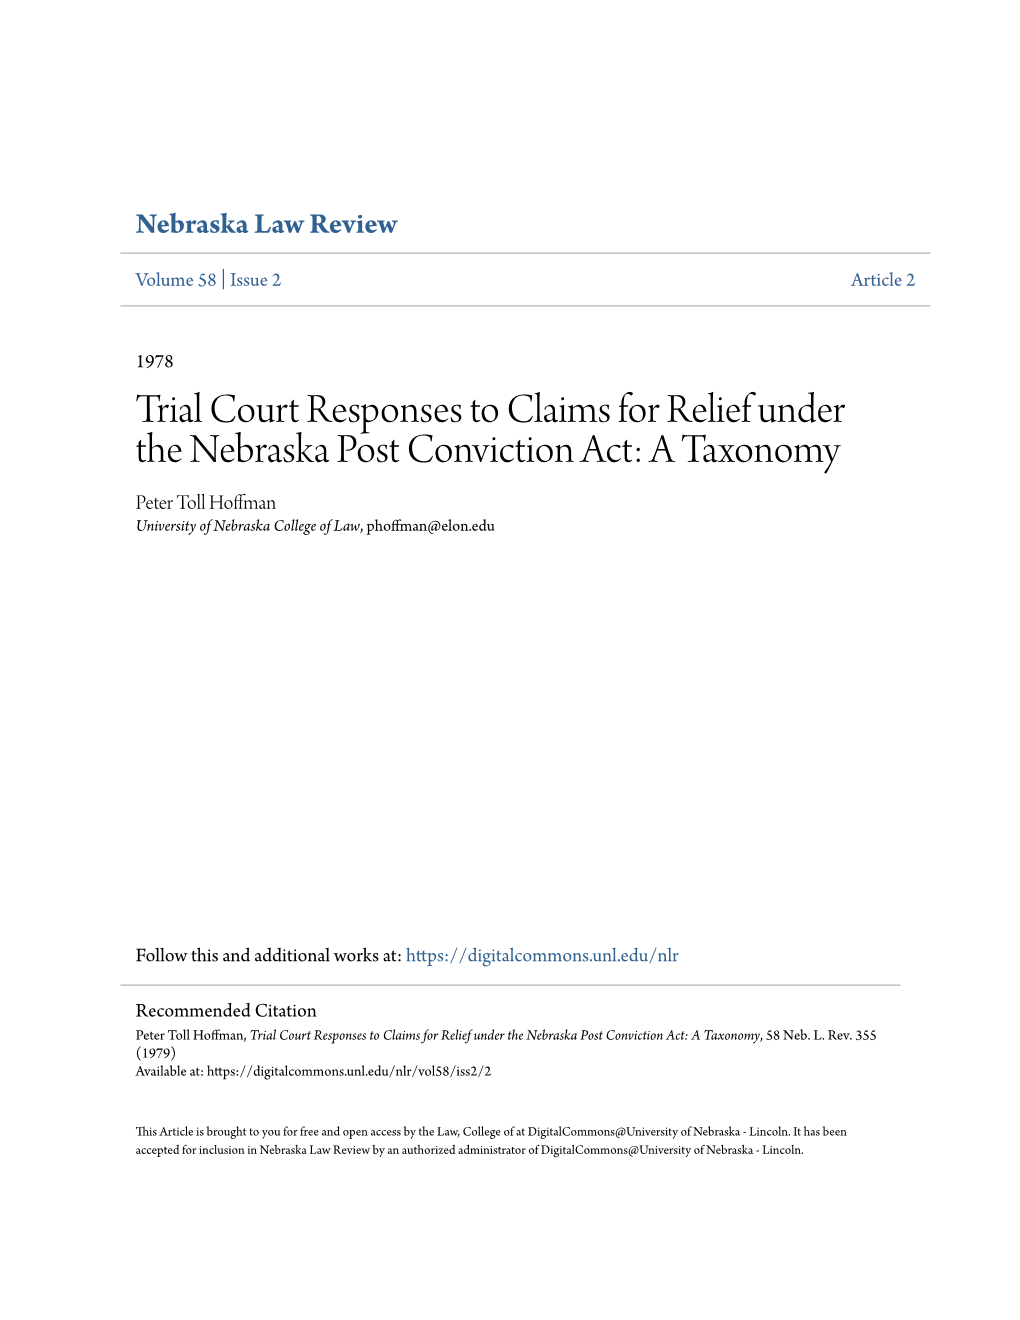 Trial Court Responses to Claims for Relief Under the Nebraska